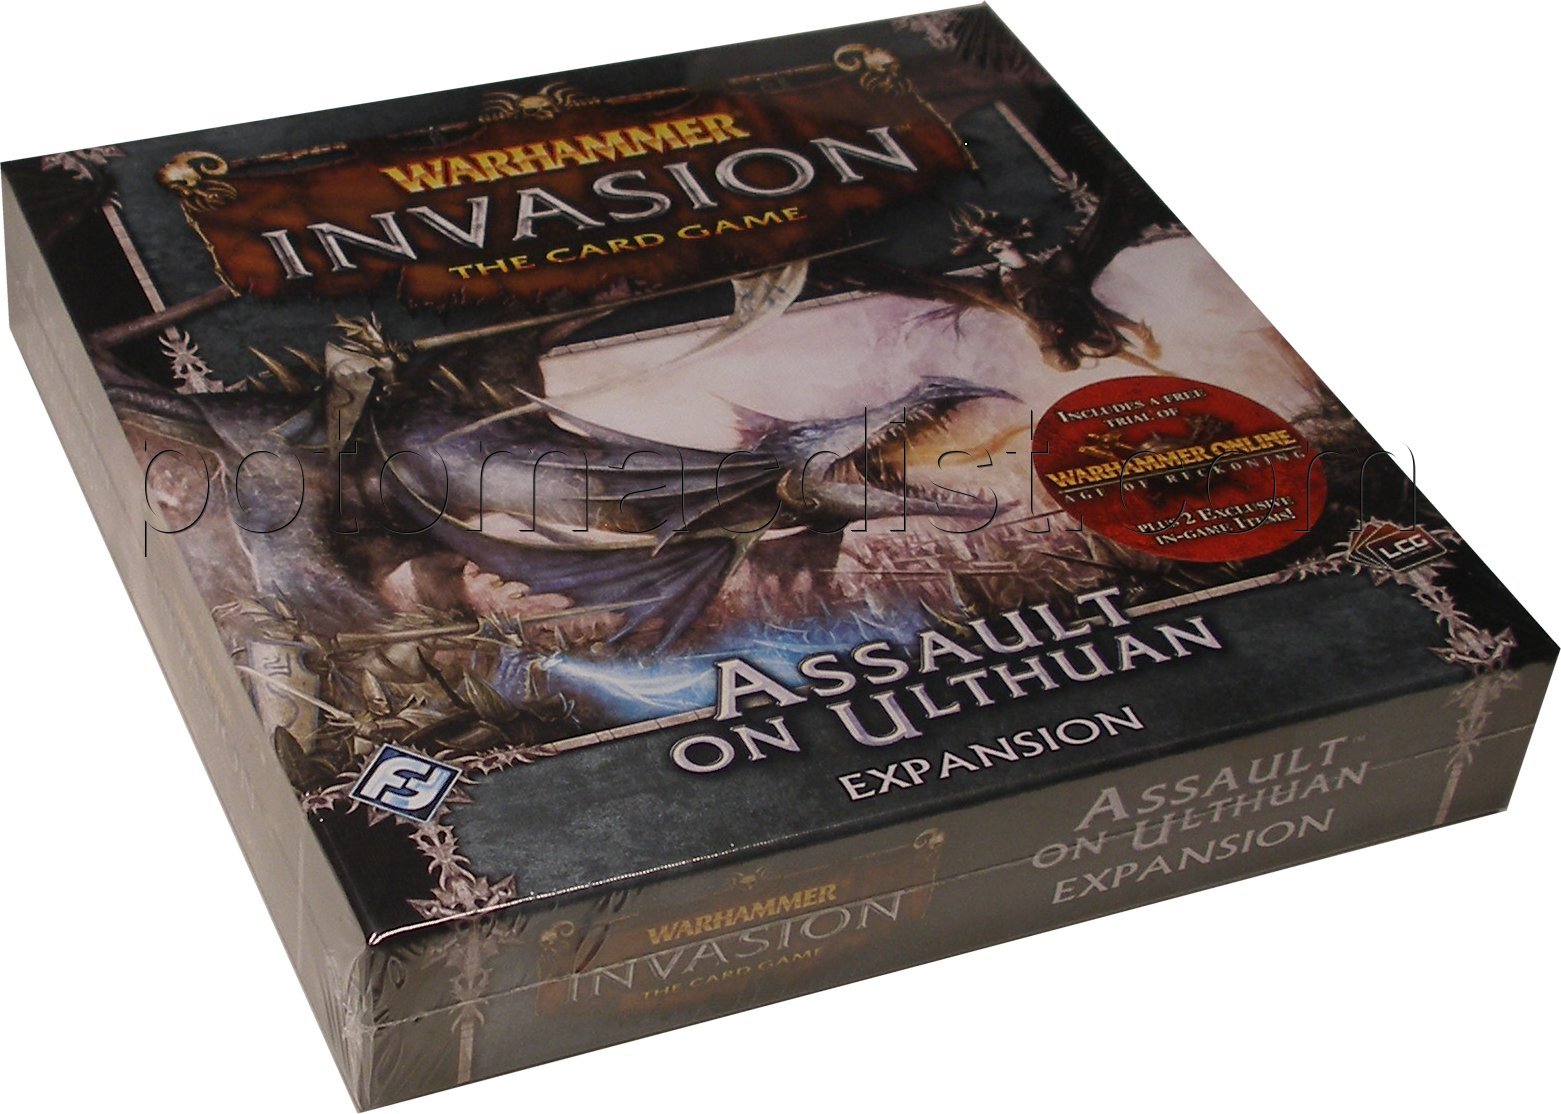 Assault On Ulthuan Expansion For Warhammer Invasion LCG by FFG Fantasy flight